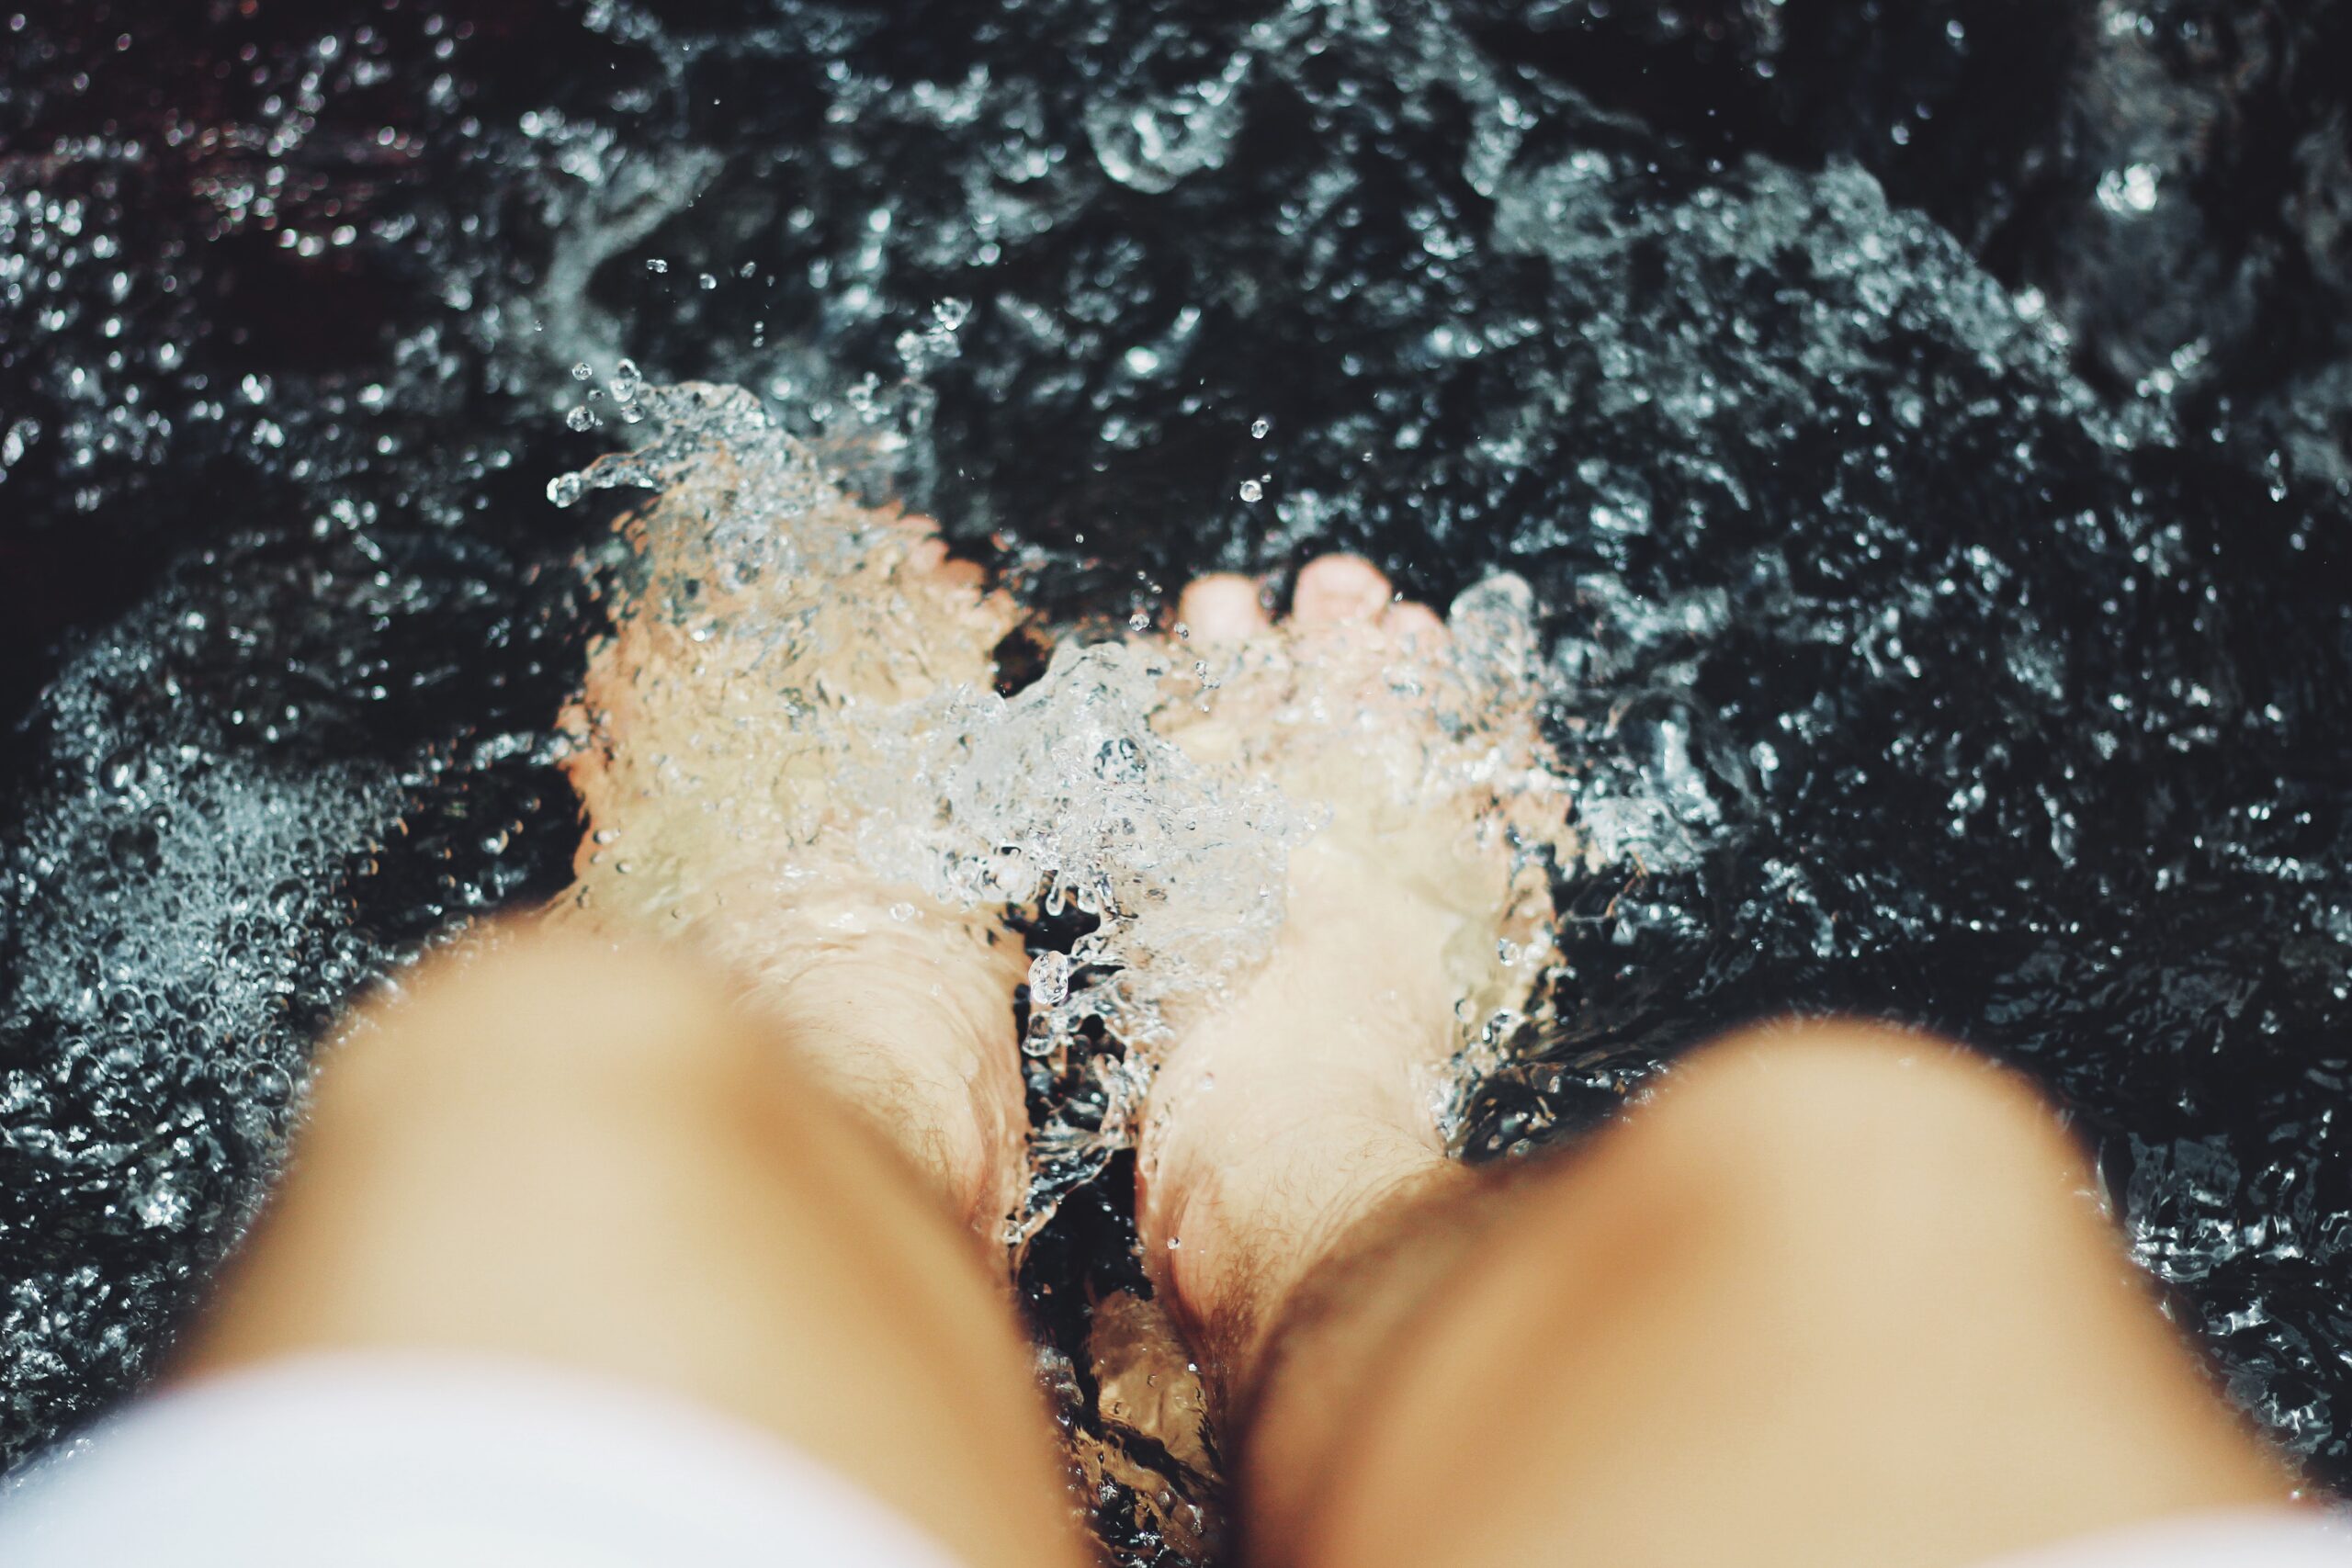 ALL YOU NEED TO KNOW ABOUT THE BENEFITS OF THE IONIC FOOT DETOX